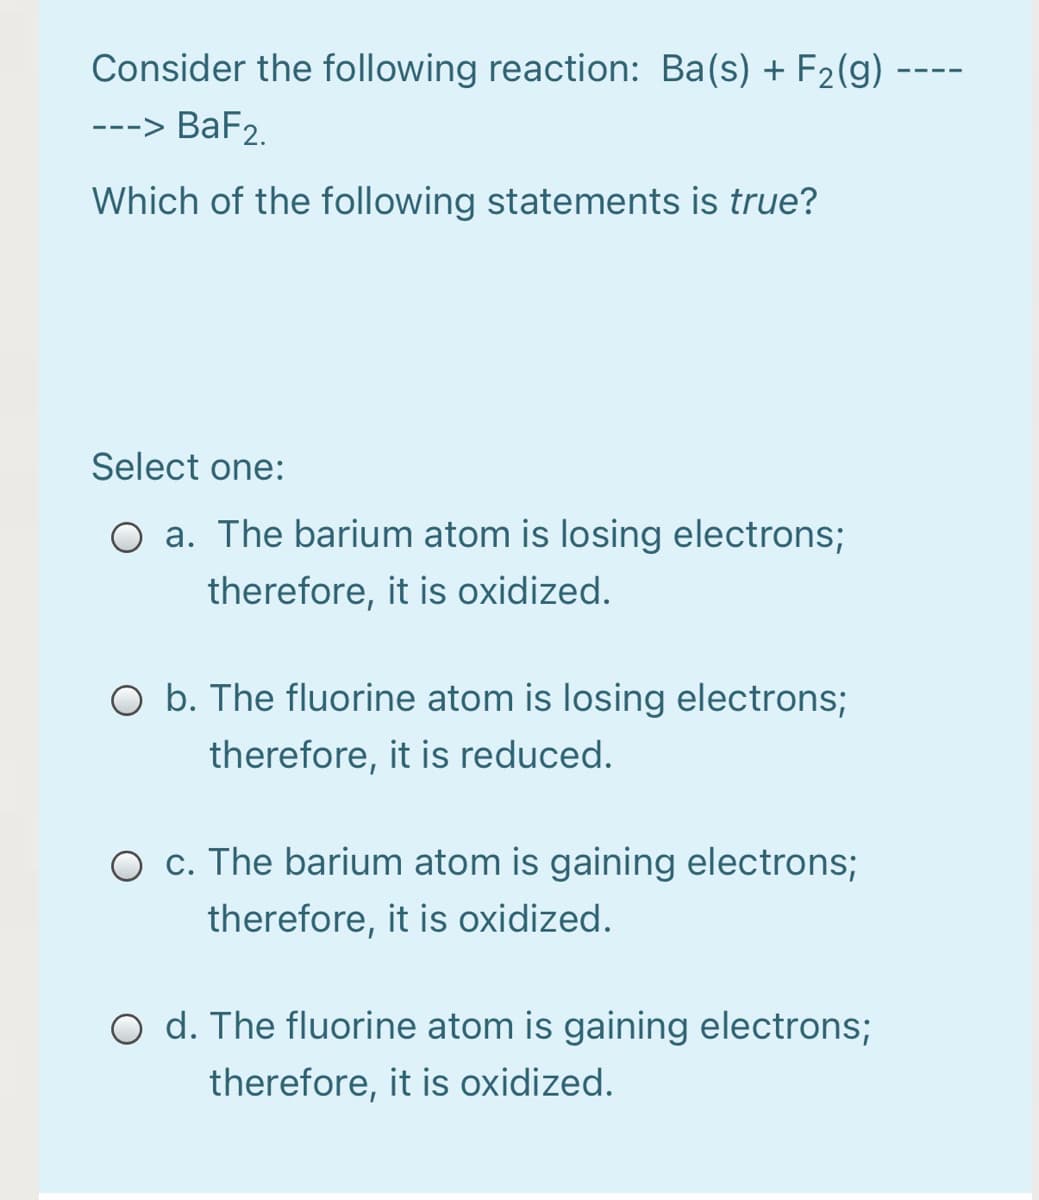 Consider the following reaction: Ba(s) + F2(g)
---> BaF2.
Which of the following statements is true?
Select one:
O a. The barium atom is losing electrons;
therefore, it is oxidized.
O b. The fluorine atom is losing electrons;
therefore, it is reduced.
O c. The barium atom is gaining electrons;
therefore, it is oxidized.
O d. The fluorine atom is gaining electrons;
therefore, it is oxidized.
